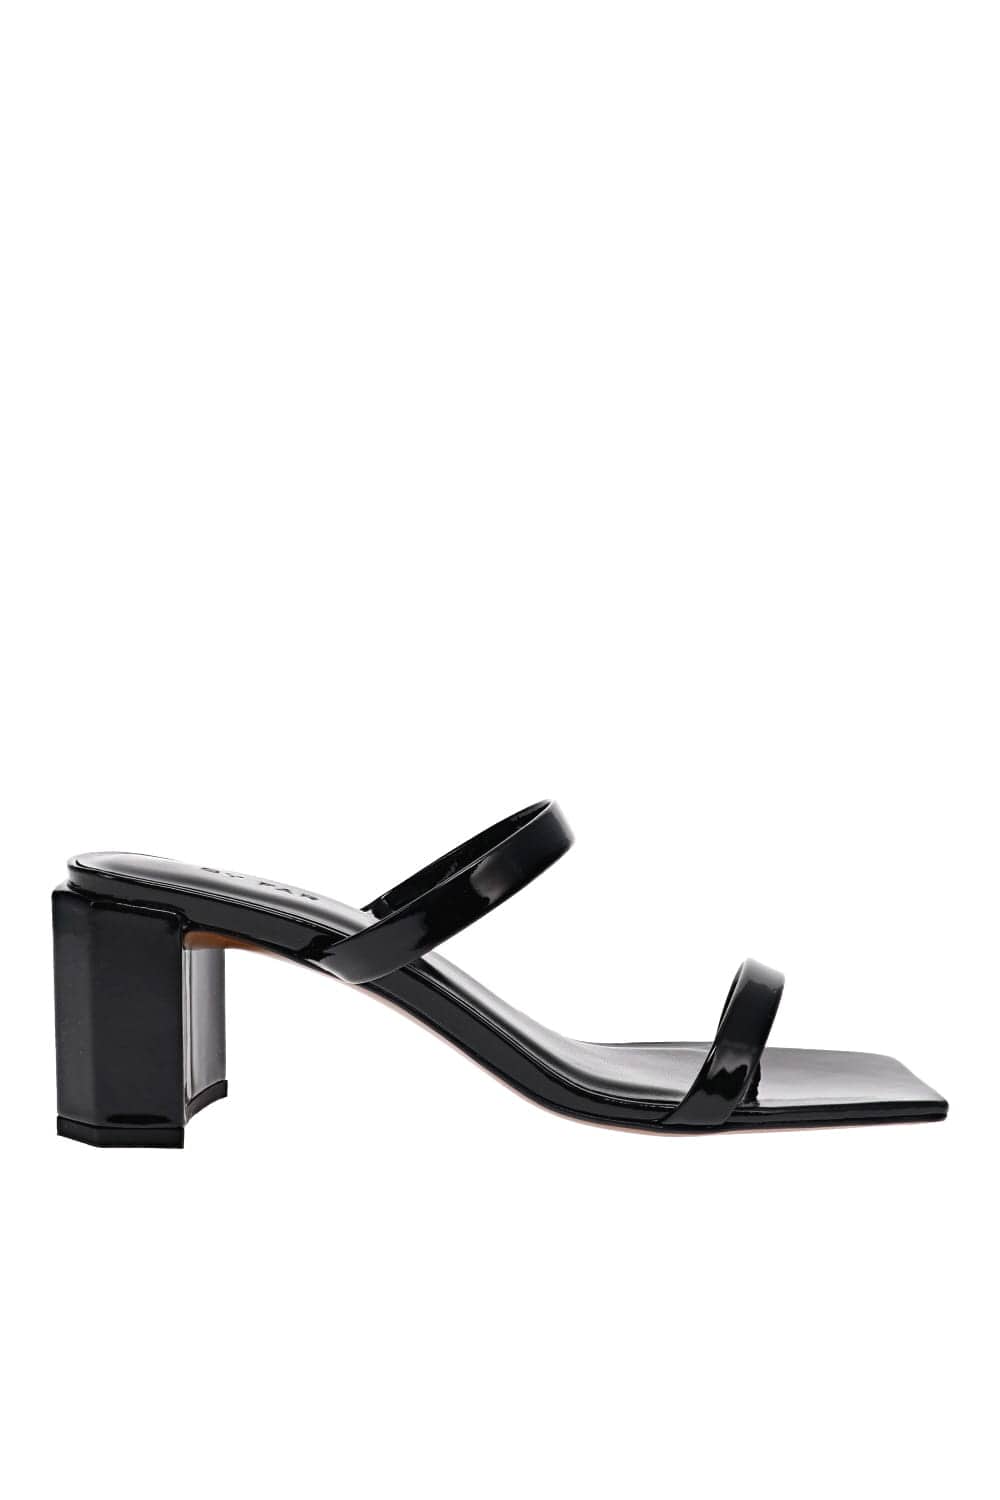 BY FAR Tanya Black Patent Leather Mules